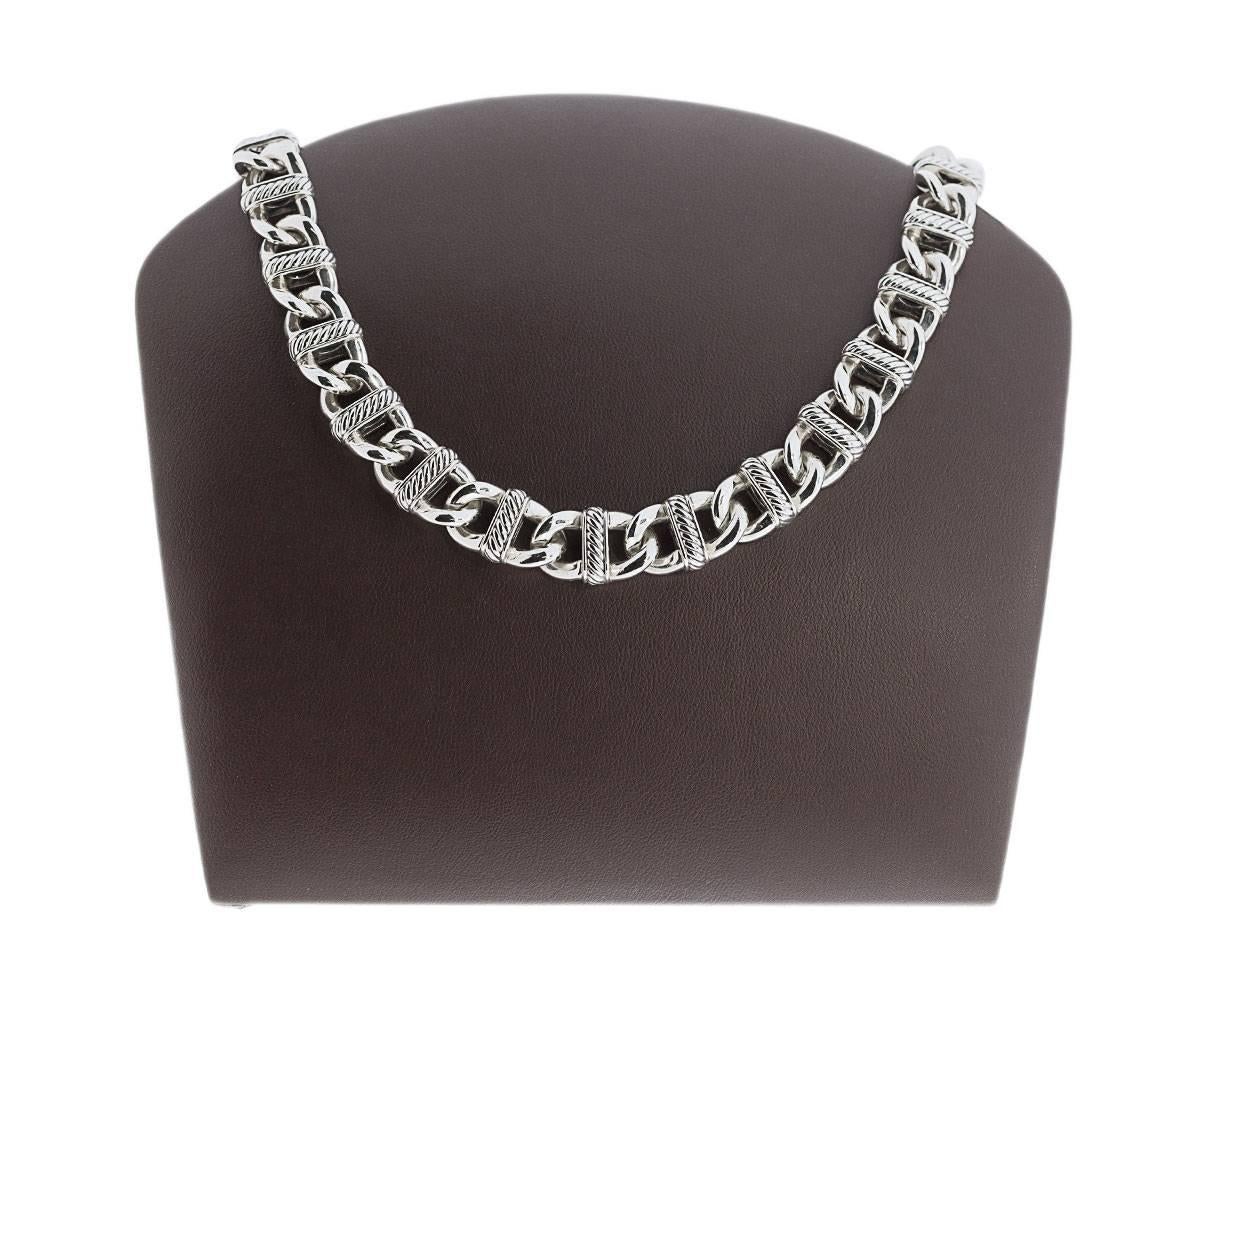 This beautiful David Yurman necklace is from the Madison Collection. It features oval shaped curb links with cable design bars in the centers of each link. This timeless, versatile necklace measures 16